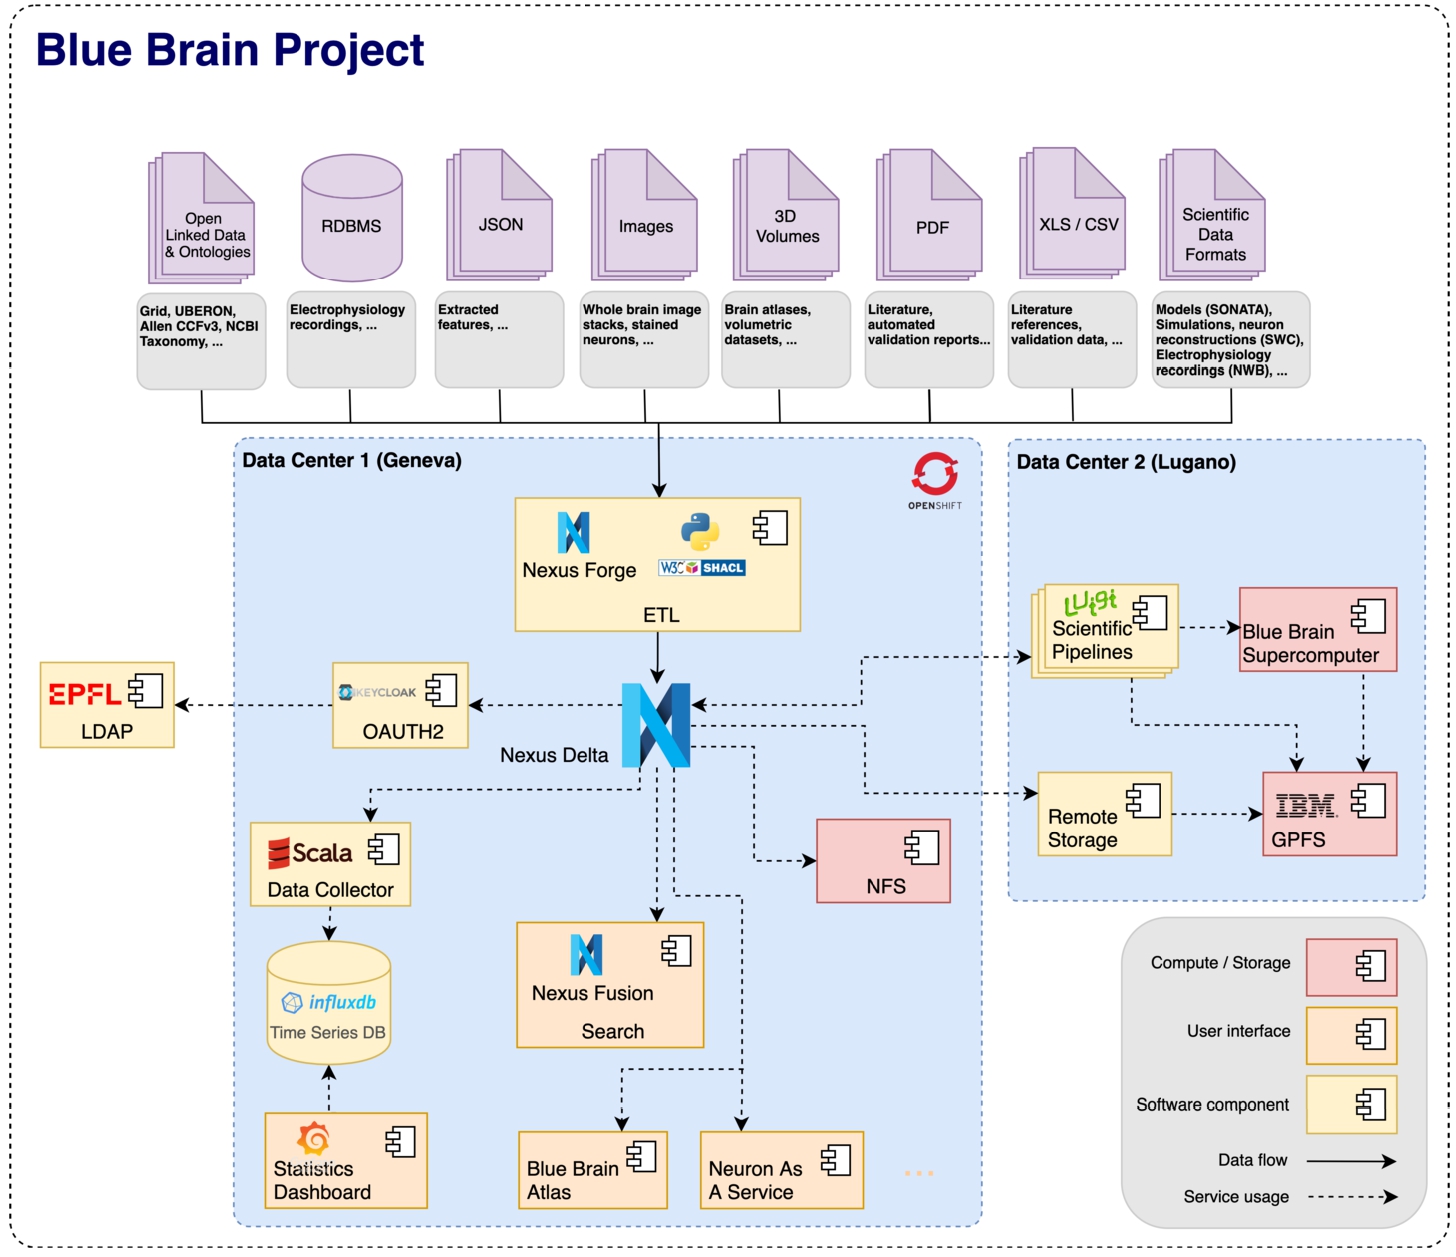 The Blue Brain Project leverages Blue Brain Nexus to integrate a broad variety of heterogeneous data across multiple data centers. Furthermore, scientists and engineers at Blue Brain leverage the (meta)data integrated to power multiple scientific applications.